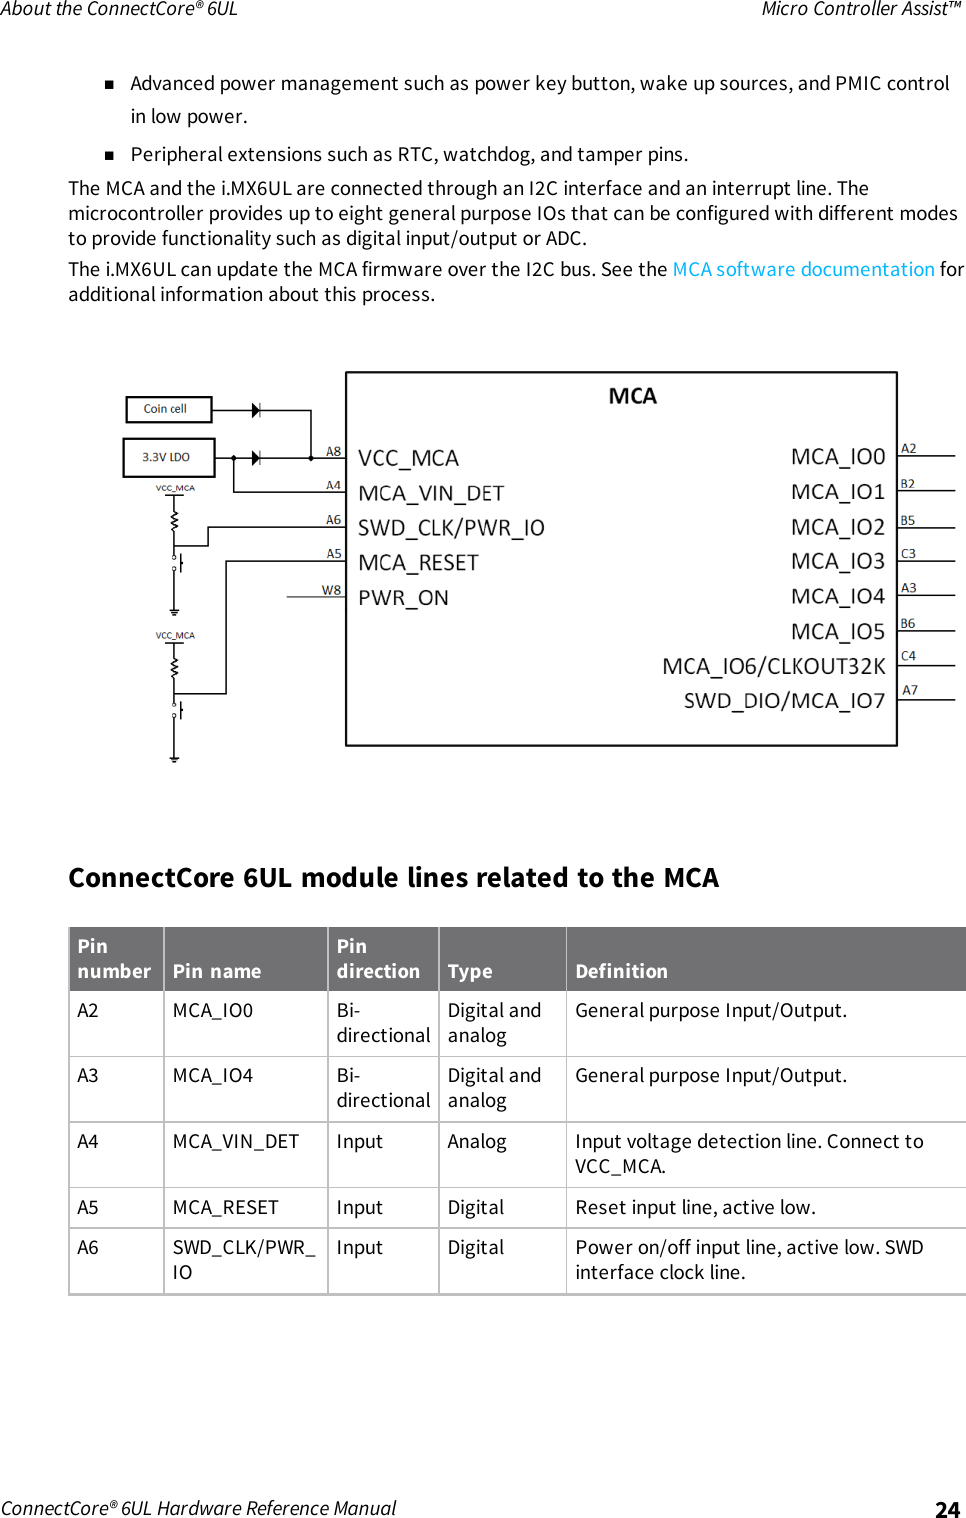 About the ConnectCore® 6UL Micro Controller Assist™ConnectCore® 6UL Hardware Reference Manual 24nAdvanced power management such as power key button, wake up sources, and PMIC controlin low power.nPeripheral extensions such as RTC, watchdog, and tamper pins.The MCA and the i.MX6UL are connected through an I2C interface and an interrupt line. Themicrocontroller provides up to eight general purpose IOs that can be configured with different modesto provide functionality such as digital input/output or ADC.The i.MX6UL can update the MCA firmware over the I2C bus. See the MCAsoftware documentation foradditional information about this process.ConnectCore 6UL module lines related to the MCAPinnumber Pin namePindirection Type DefinitionA2 MCA_IO0 Bi-directionalDigital andanalogGeneral purpose Input/Output.A3 MCA_IO4 Bi-directionalDigital andanalogGeneral purpose Input/Output.A4 MCA_VIN_DET Input Analog Input voltage detection line. Connect toVCC_MCA.A5 MCA_RESET Input Digital Reset input line, active low.A6 SWD_CLK/PWR_IOInput Digital Power on/off input line, active low. SWDinterface clock line.